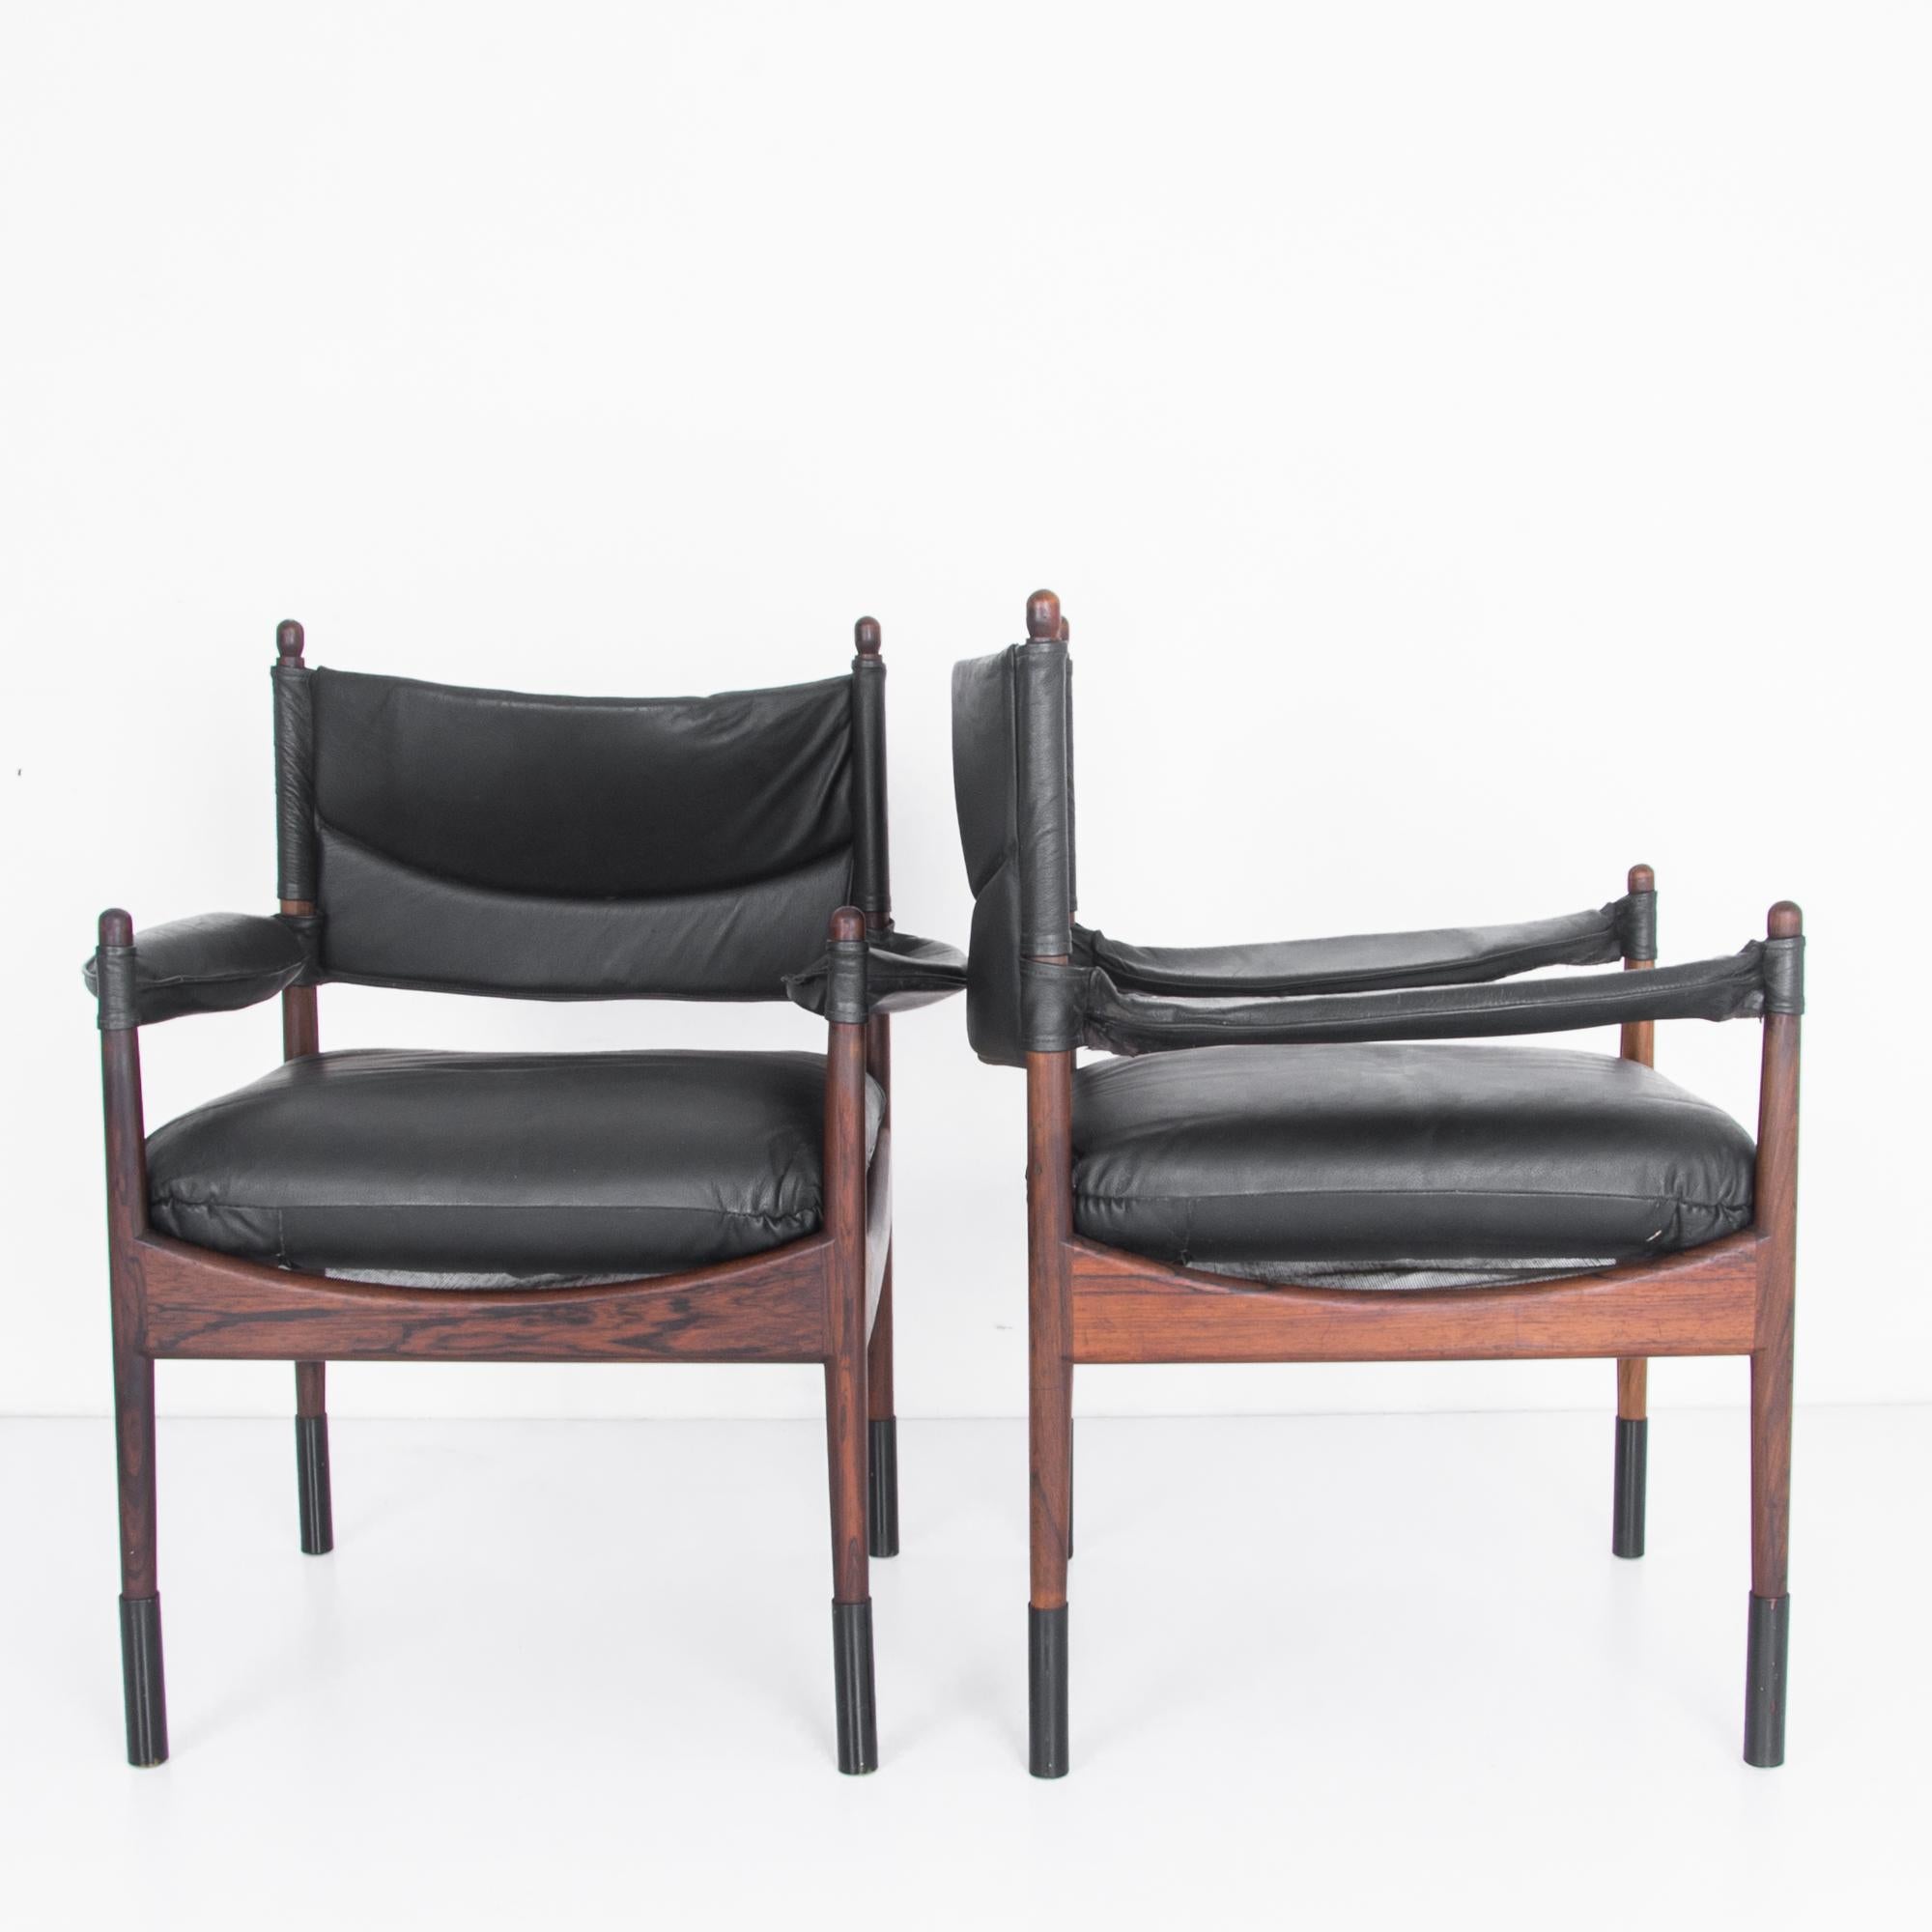 Scandinavian Modern Kristian Vedel Rosewood and Leather Chairs, a Pair